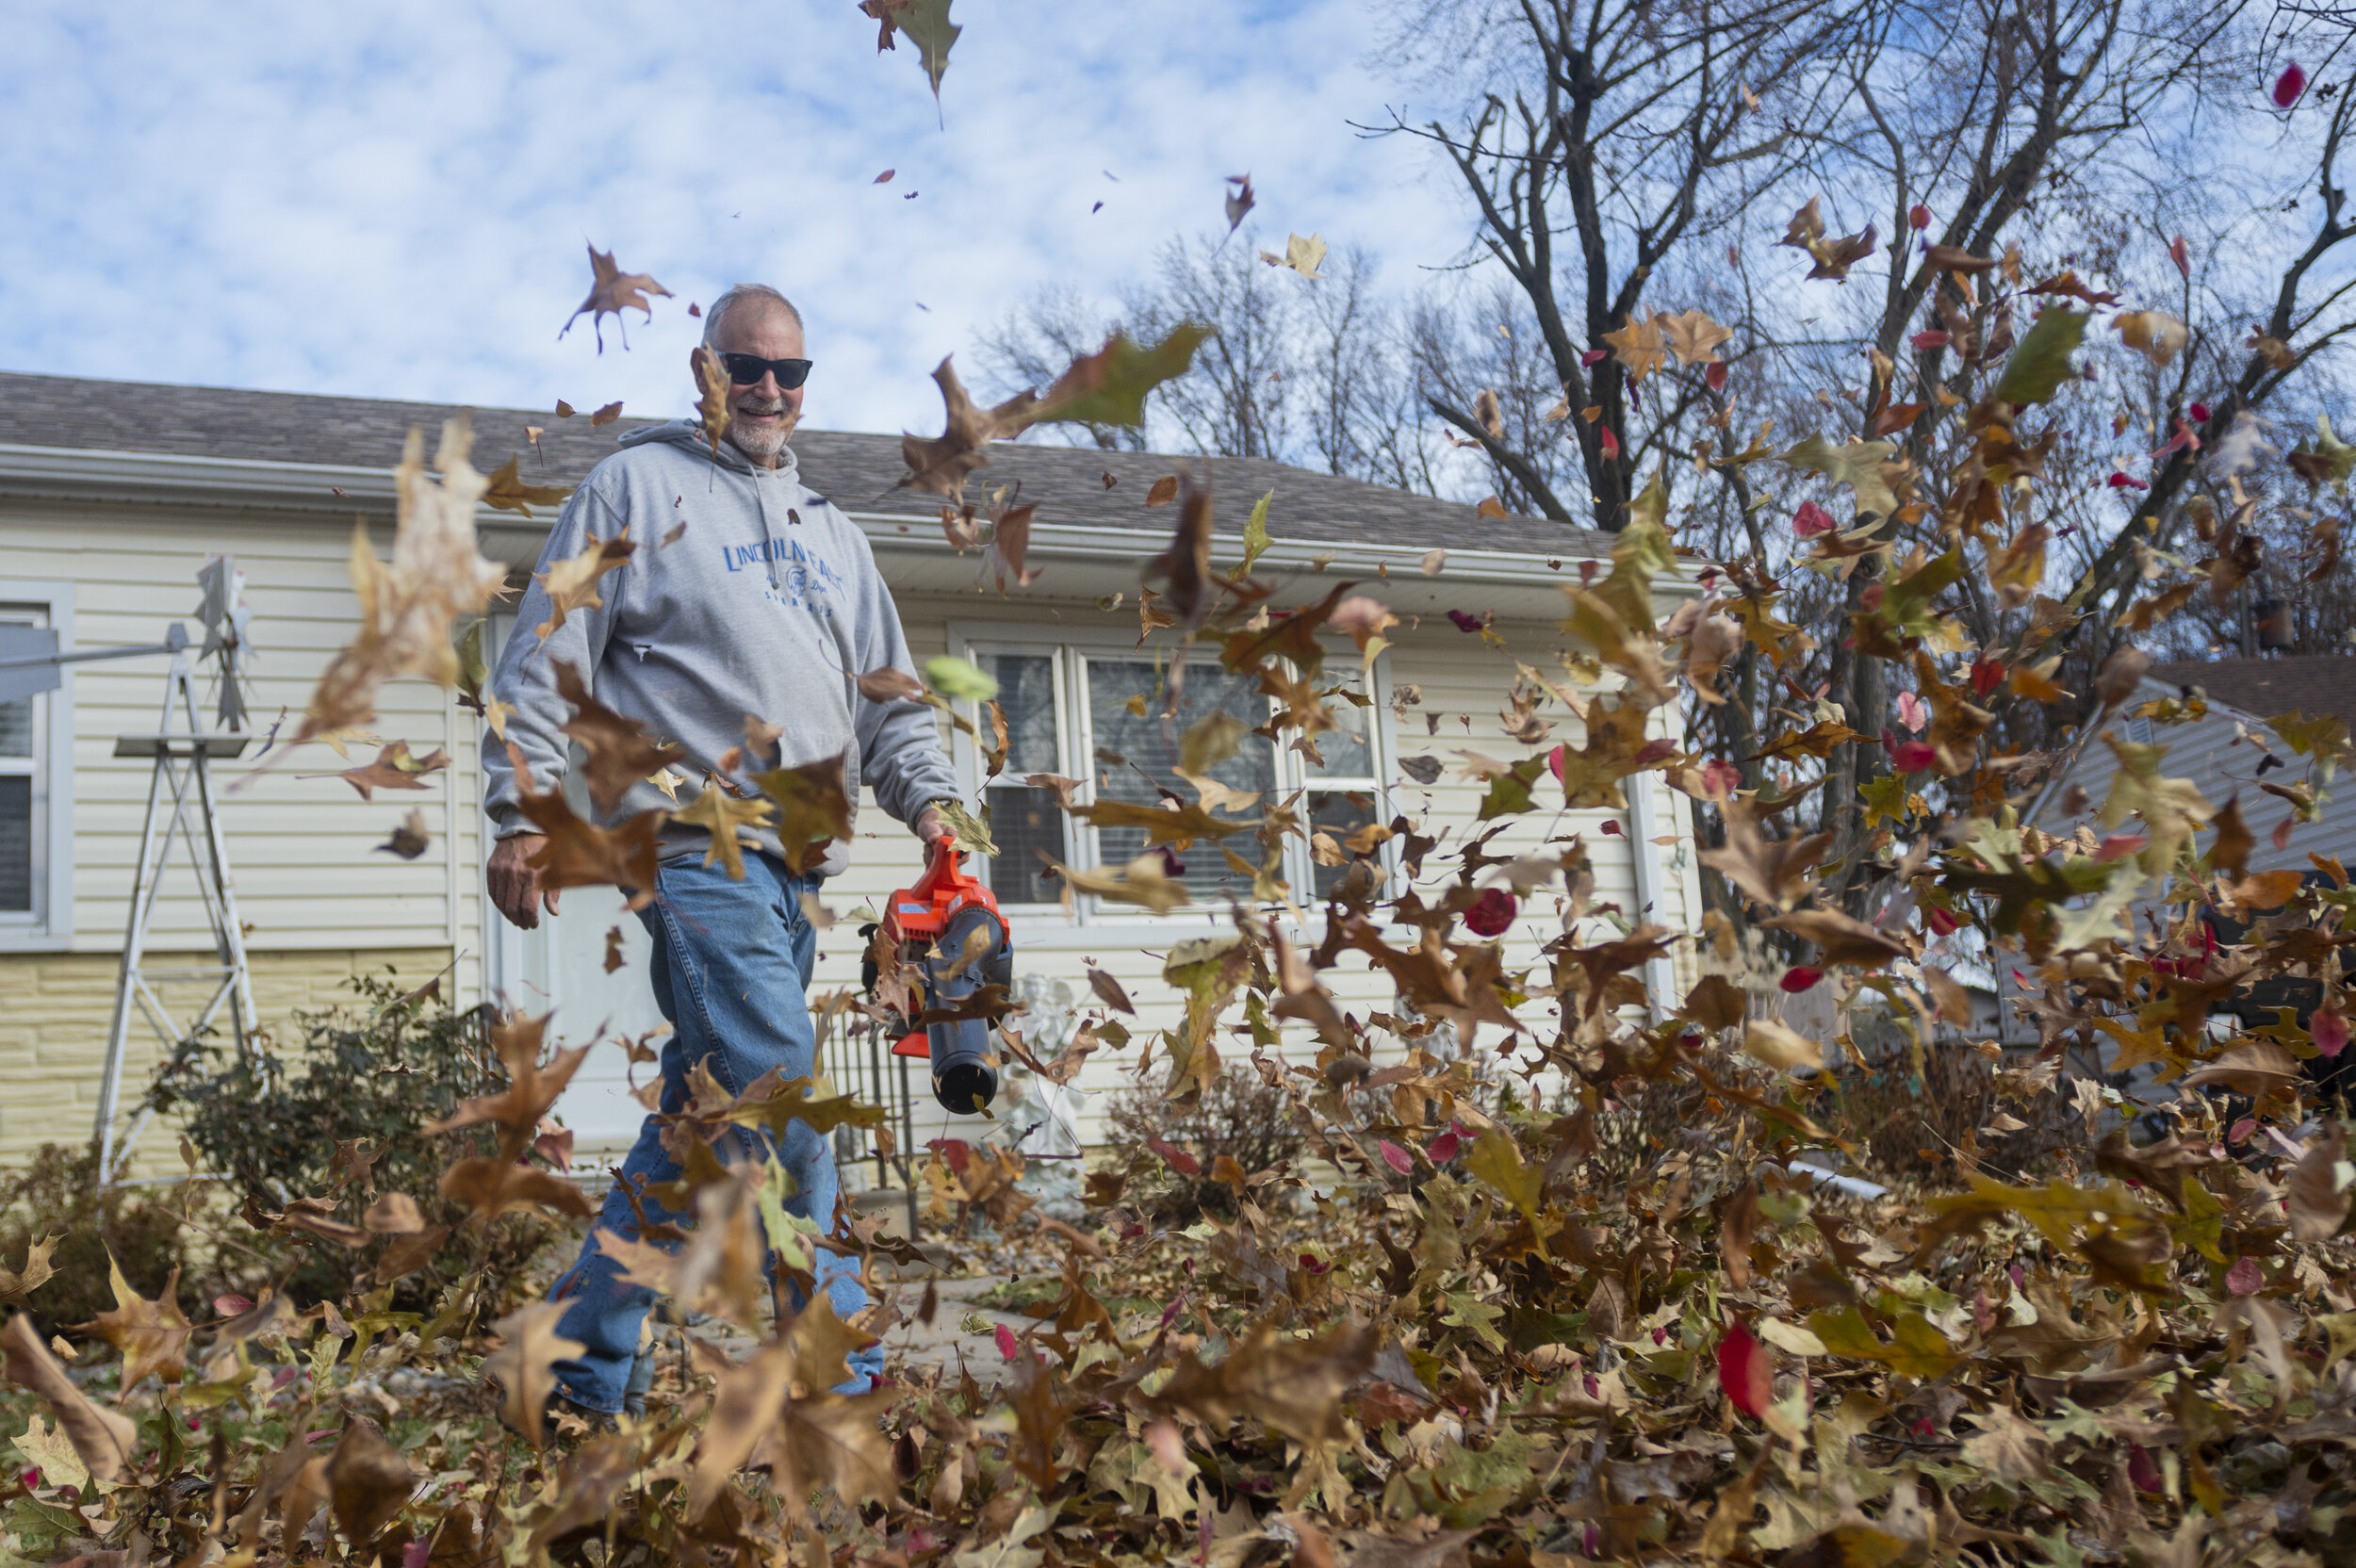  Jerry McDonald uses a leaf blower to clear derbies from his rental property on Sunday, November 15, 2020, in Lincoln, Nebraska. KENNETH FERRIERA, Journal Star. 